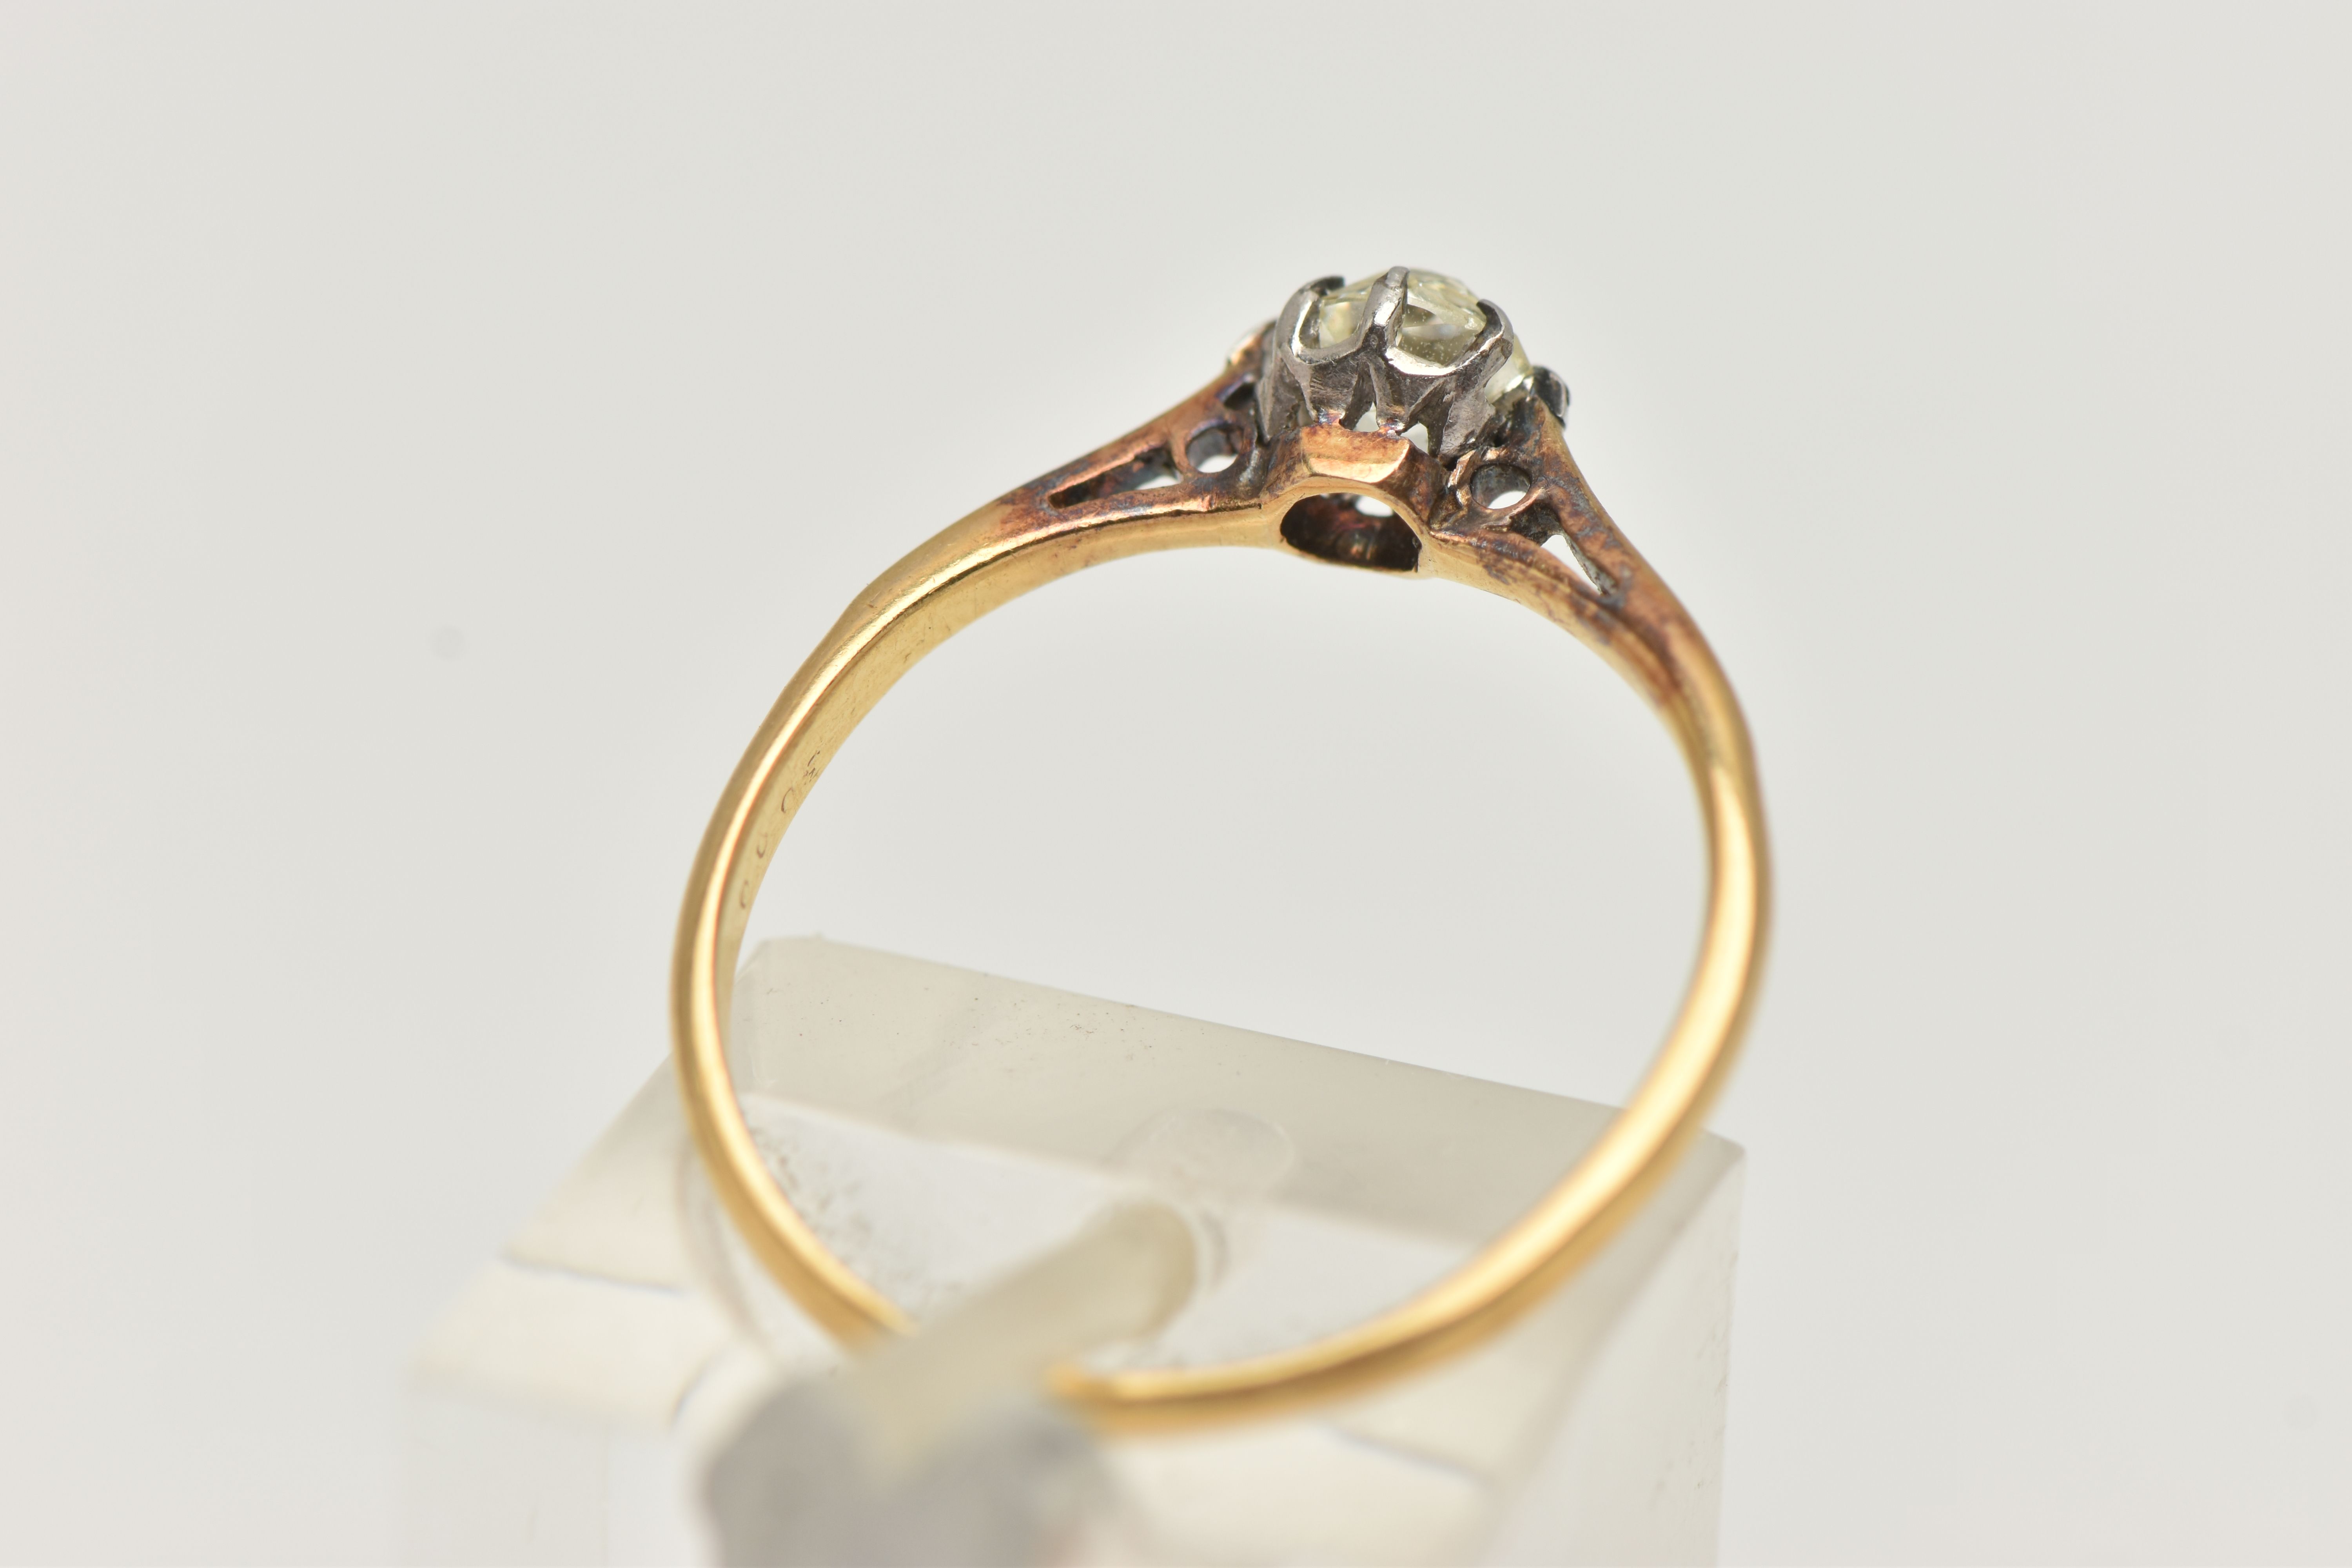 A YELLOW METAL SINGLE STONE DIAMOND RING, old cut diamond, measuring approximately 4.7mm x 4.6 x 3. - Image 3 of 4